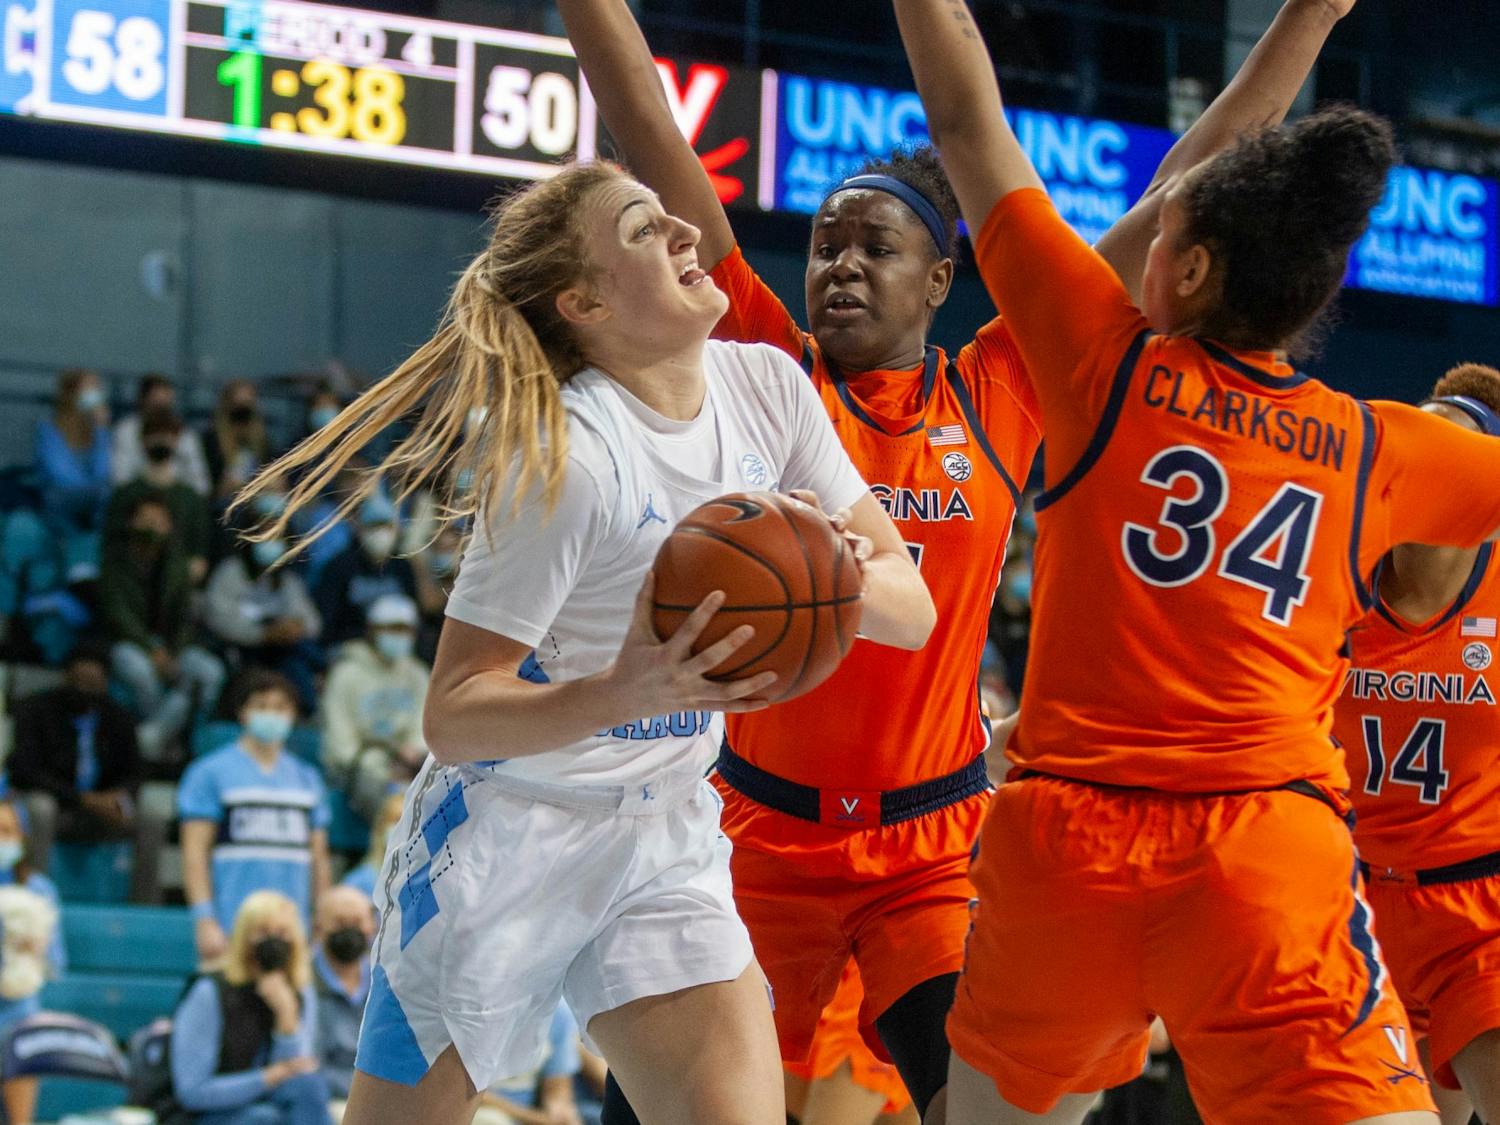 UNC sophomore guard Alyssa Utsby (1) is guarded by UVA players at the game against Virginia at Carmichael Arena on Jan. 20 2022. The Tar Heels beat the Cavliers 61-52.